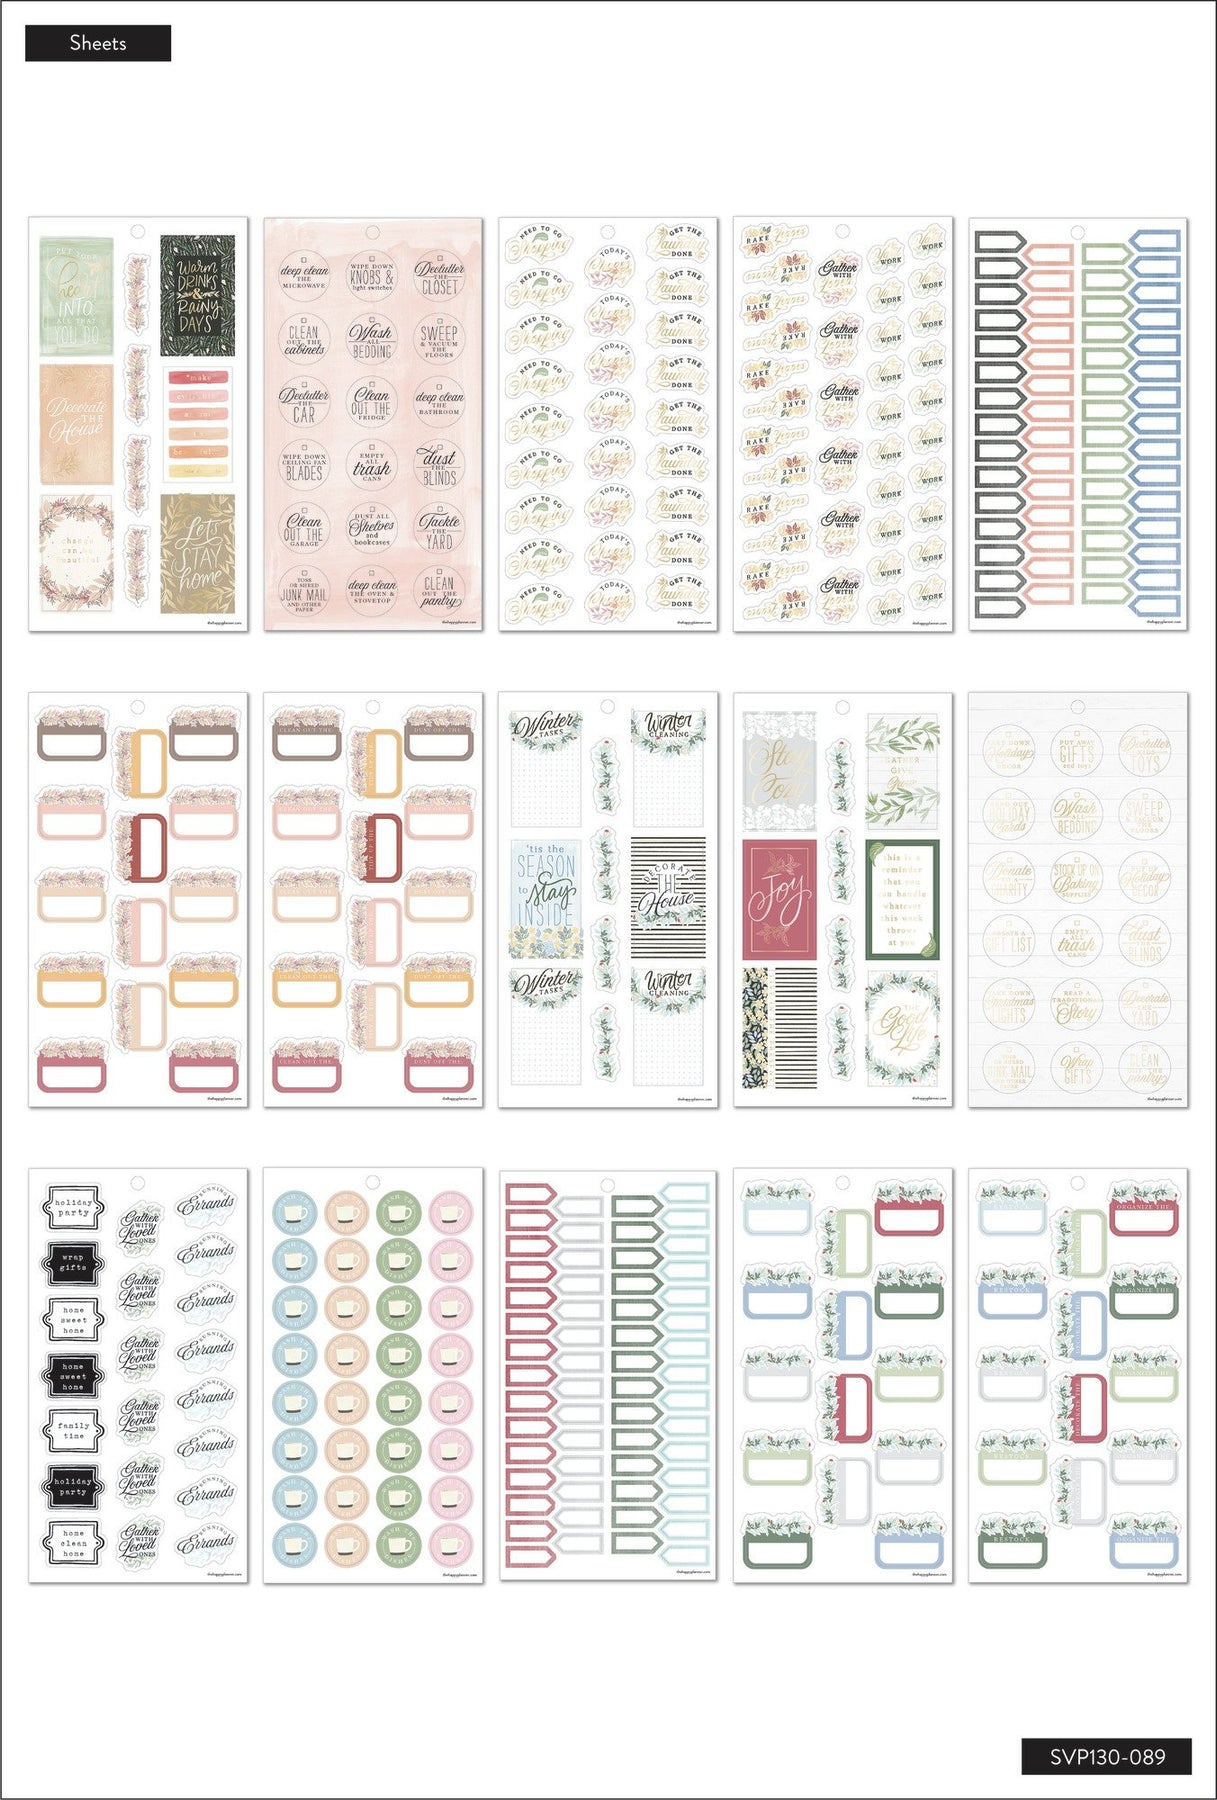 LET'S PLANNER STICKERS/AUTOCOLLANTS BOOKS LOT OF 3 (TOTAL 995 STICKERS)